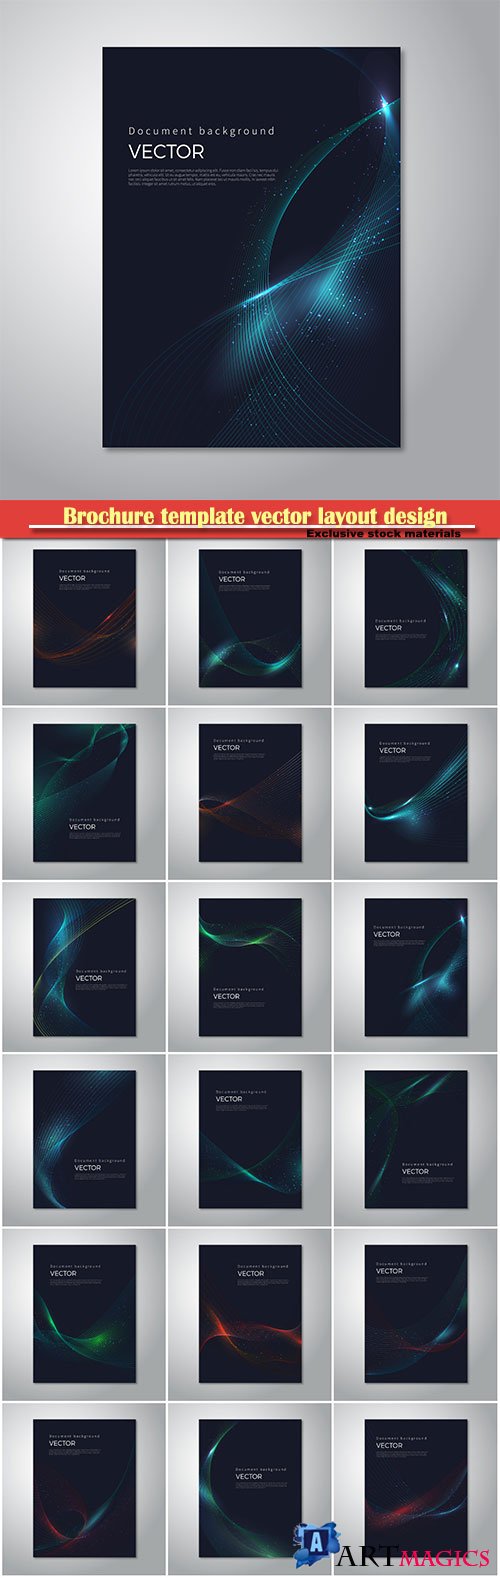 Brochure template vector layout design, abstract backgrounds